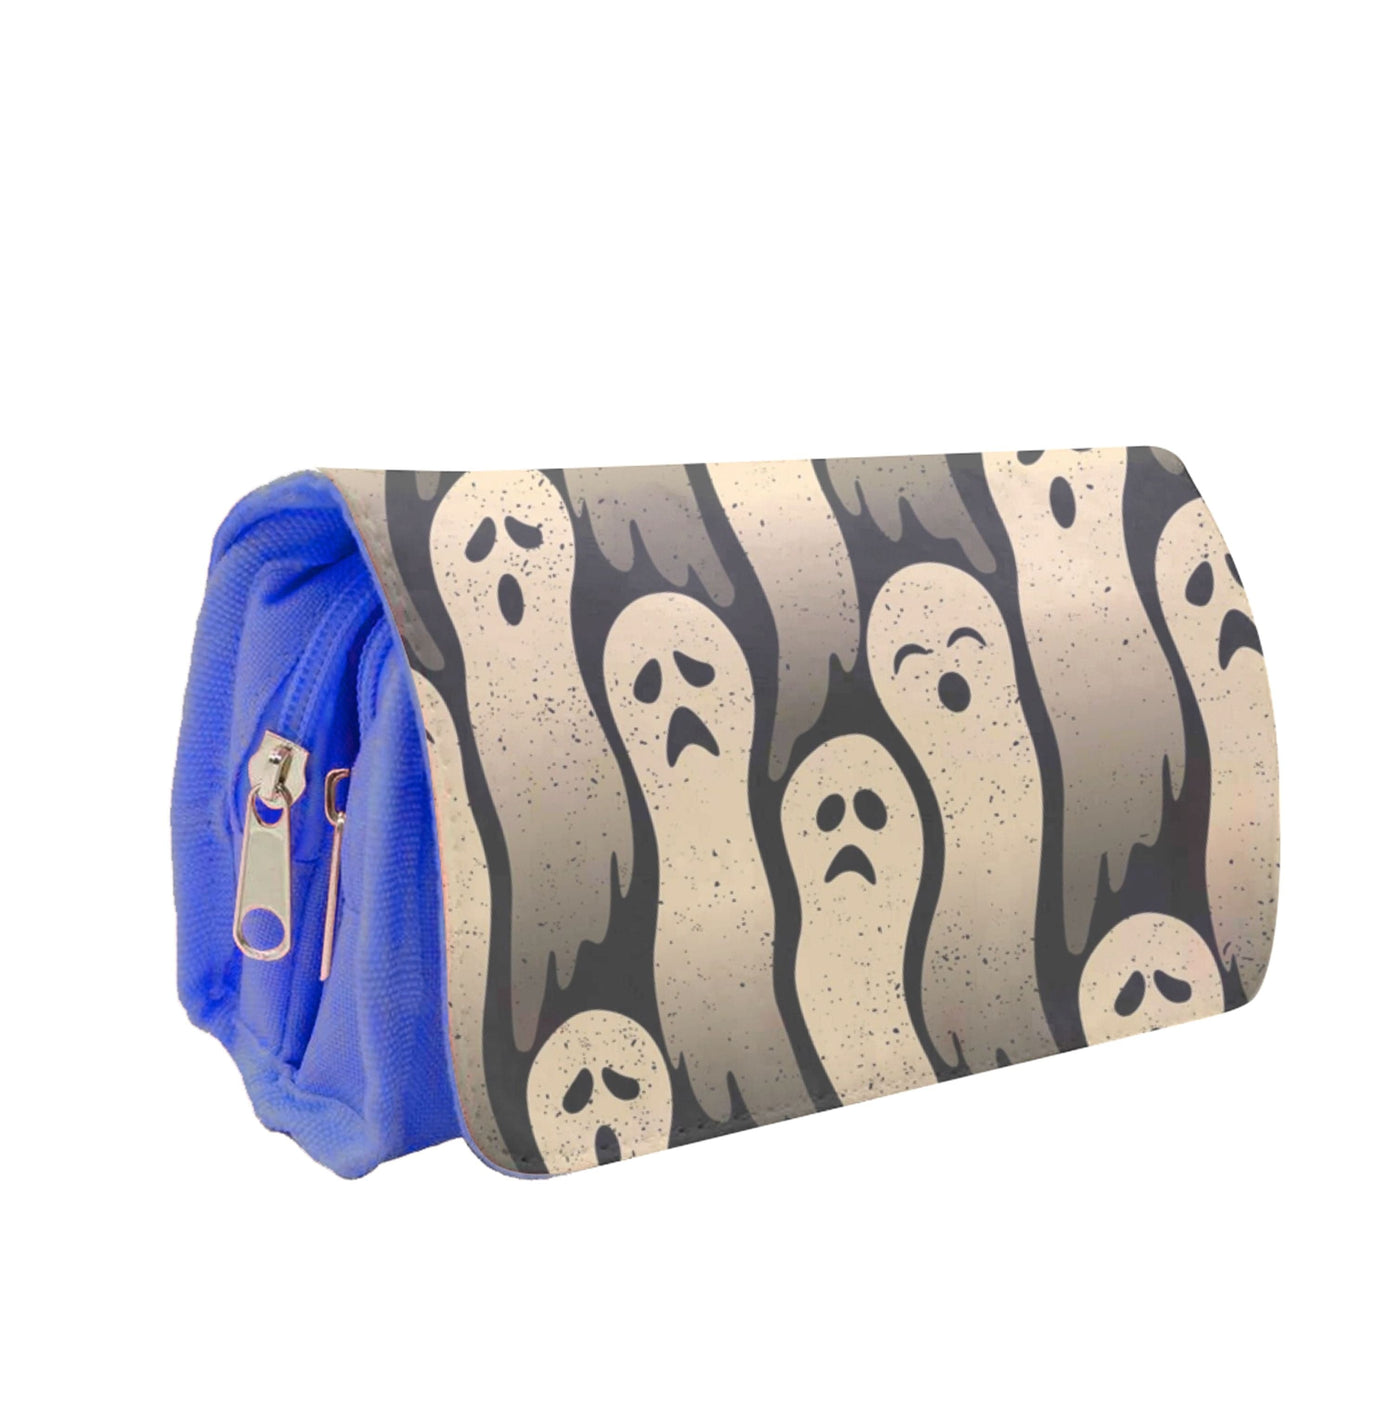 Vintage Wriggly Ghost Pattern Pencil Case